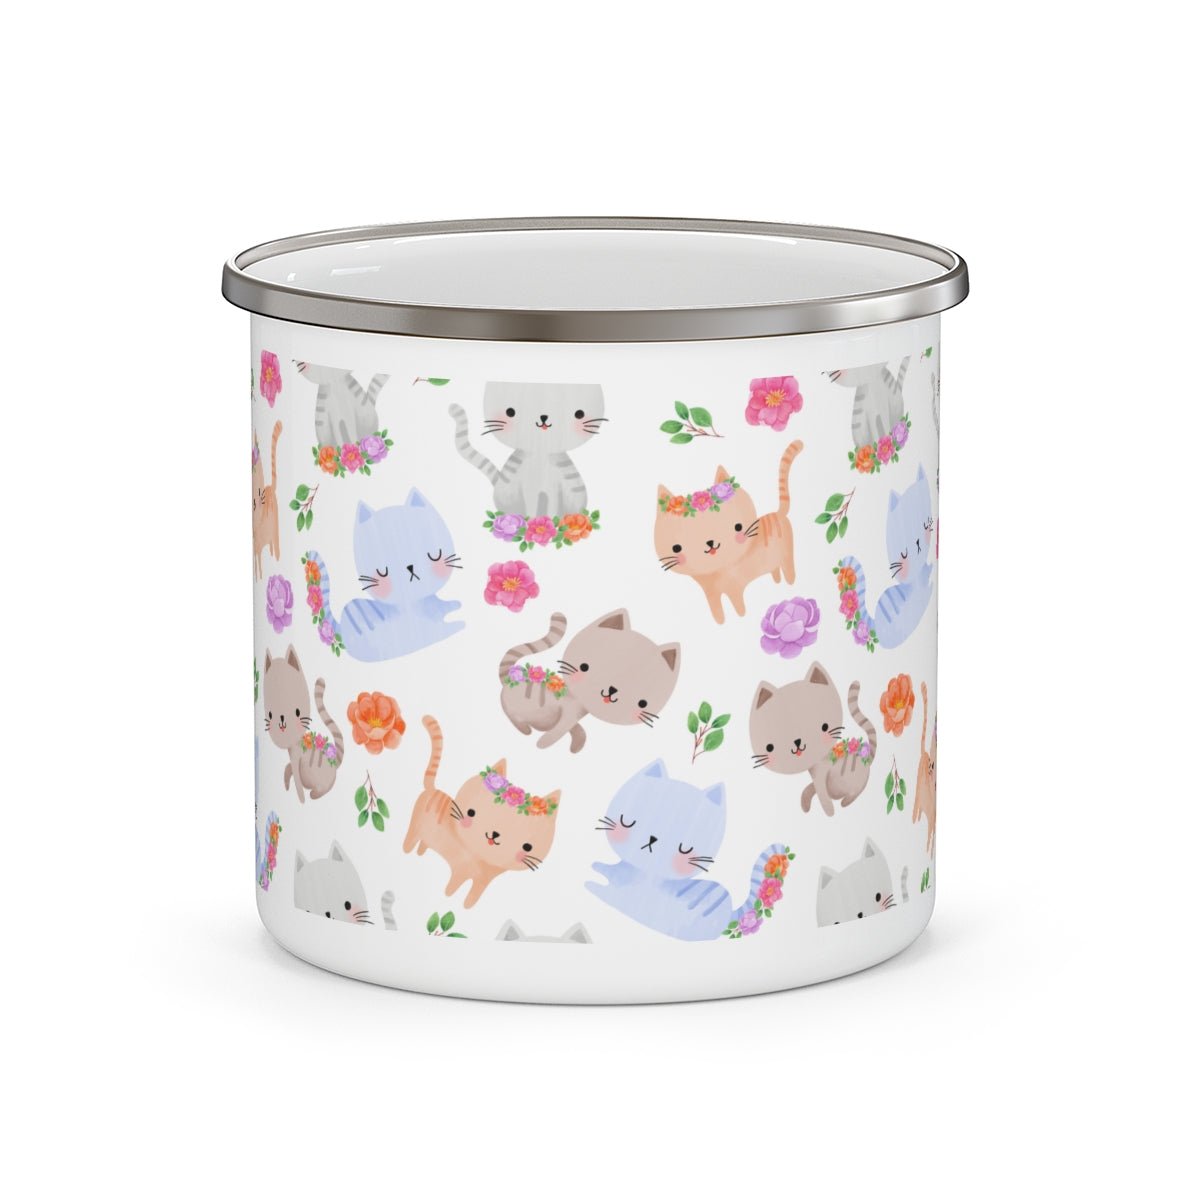 Happy Cats and Flowers Stainless Steel Camping Mug - Puffin Lime